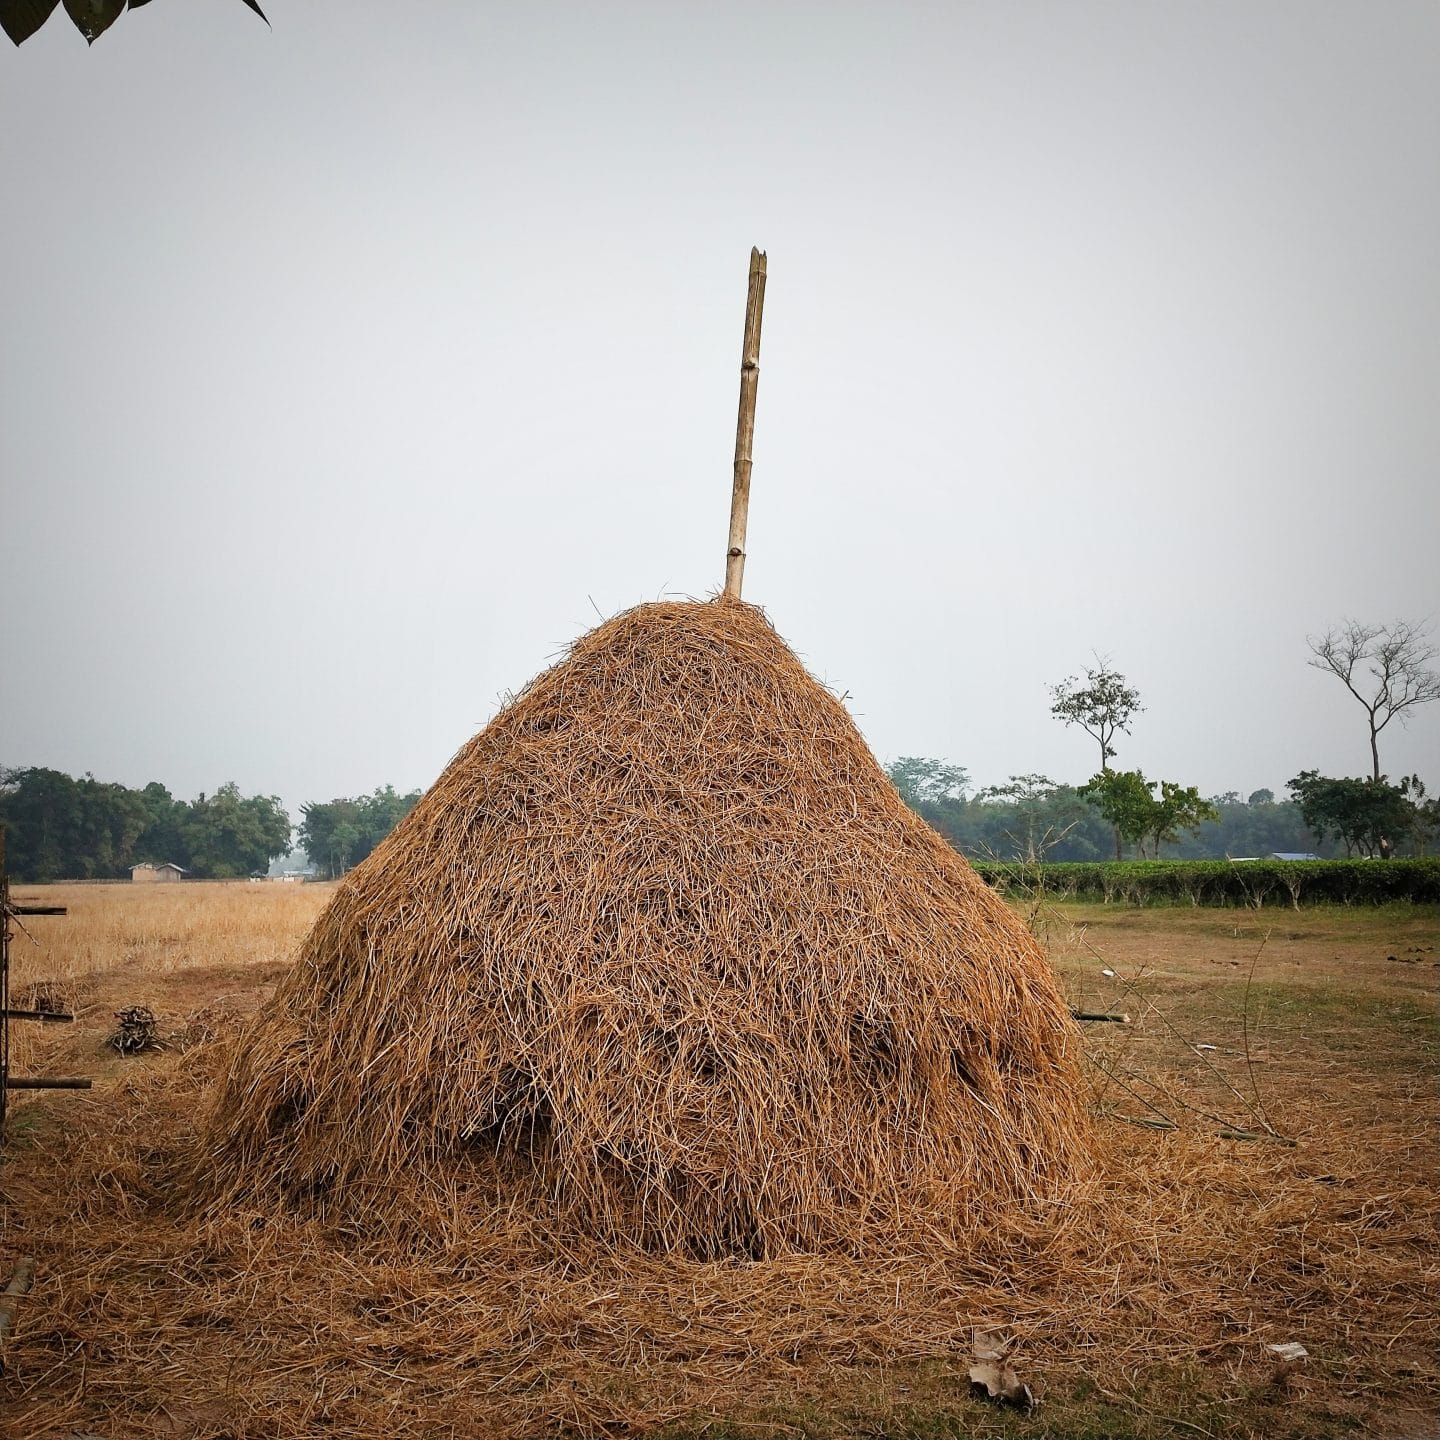 A_pile_of_straw_after_extracting_grains